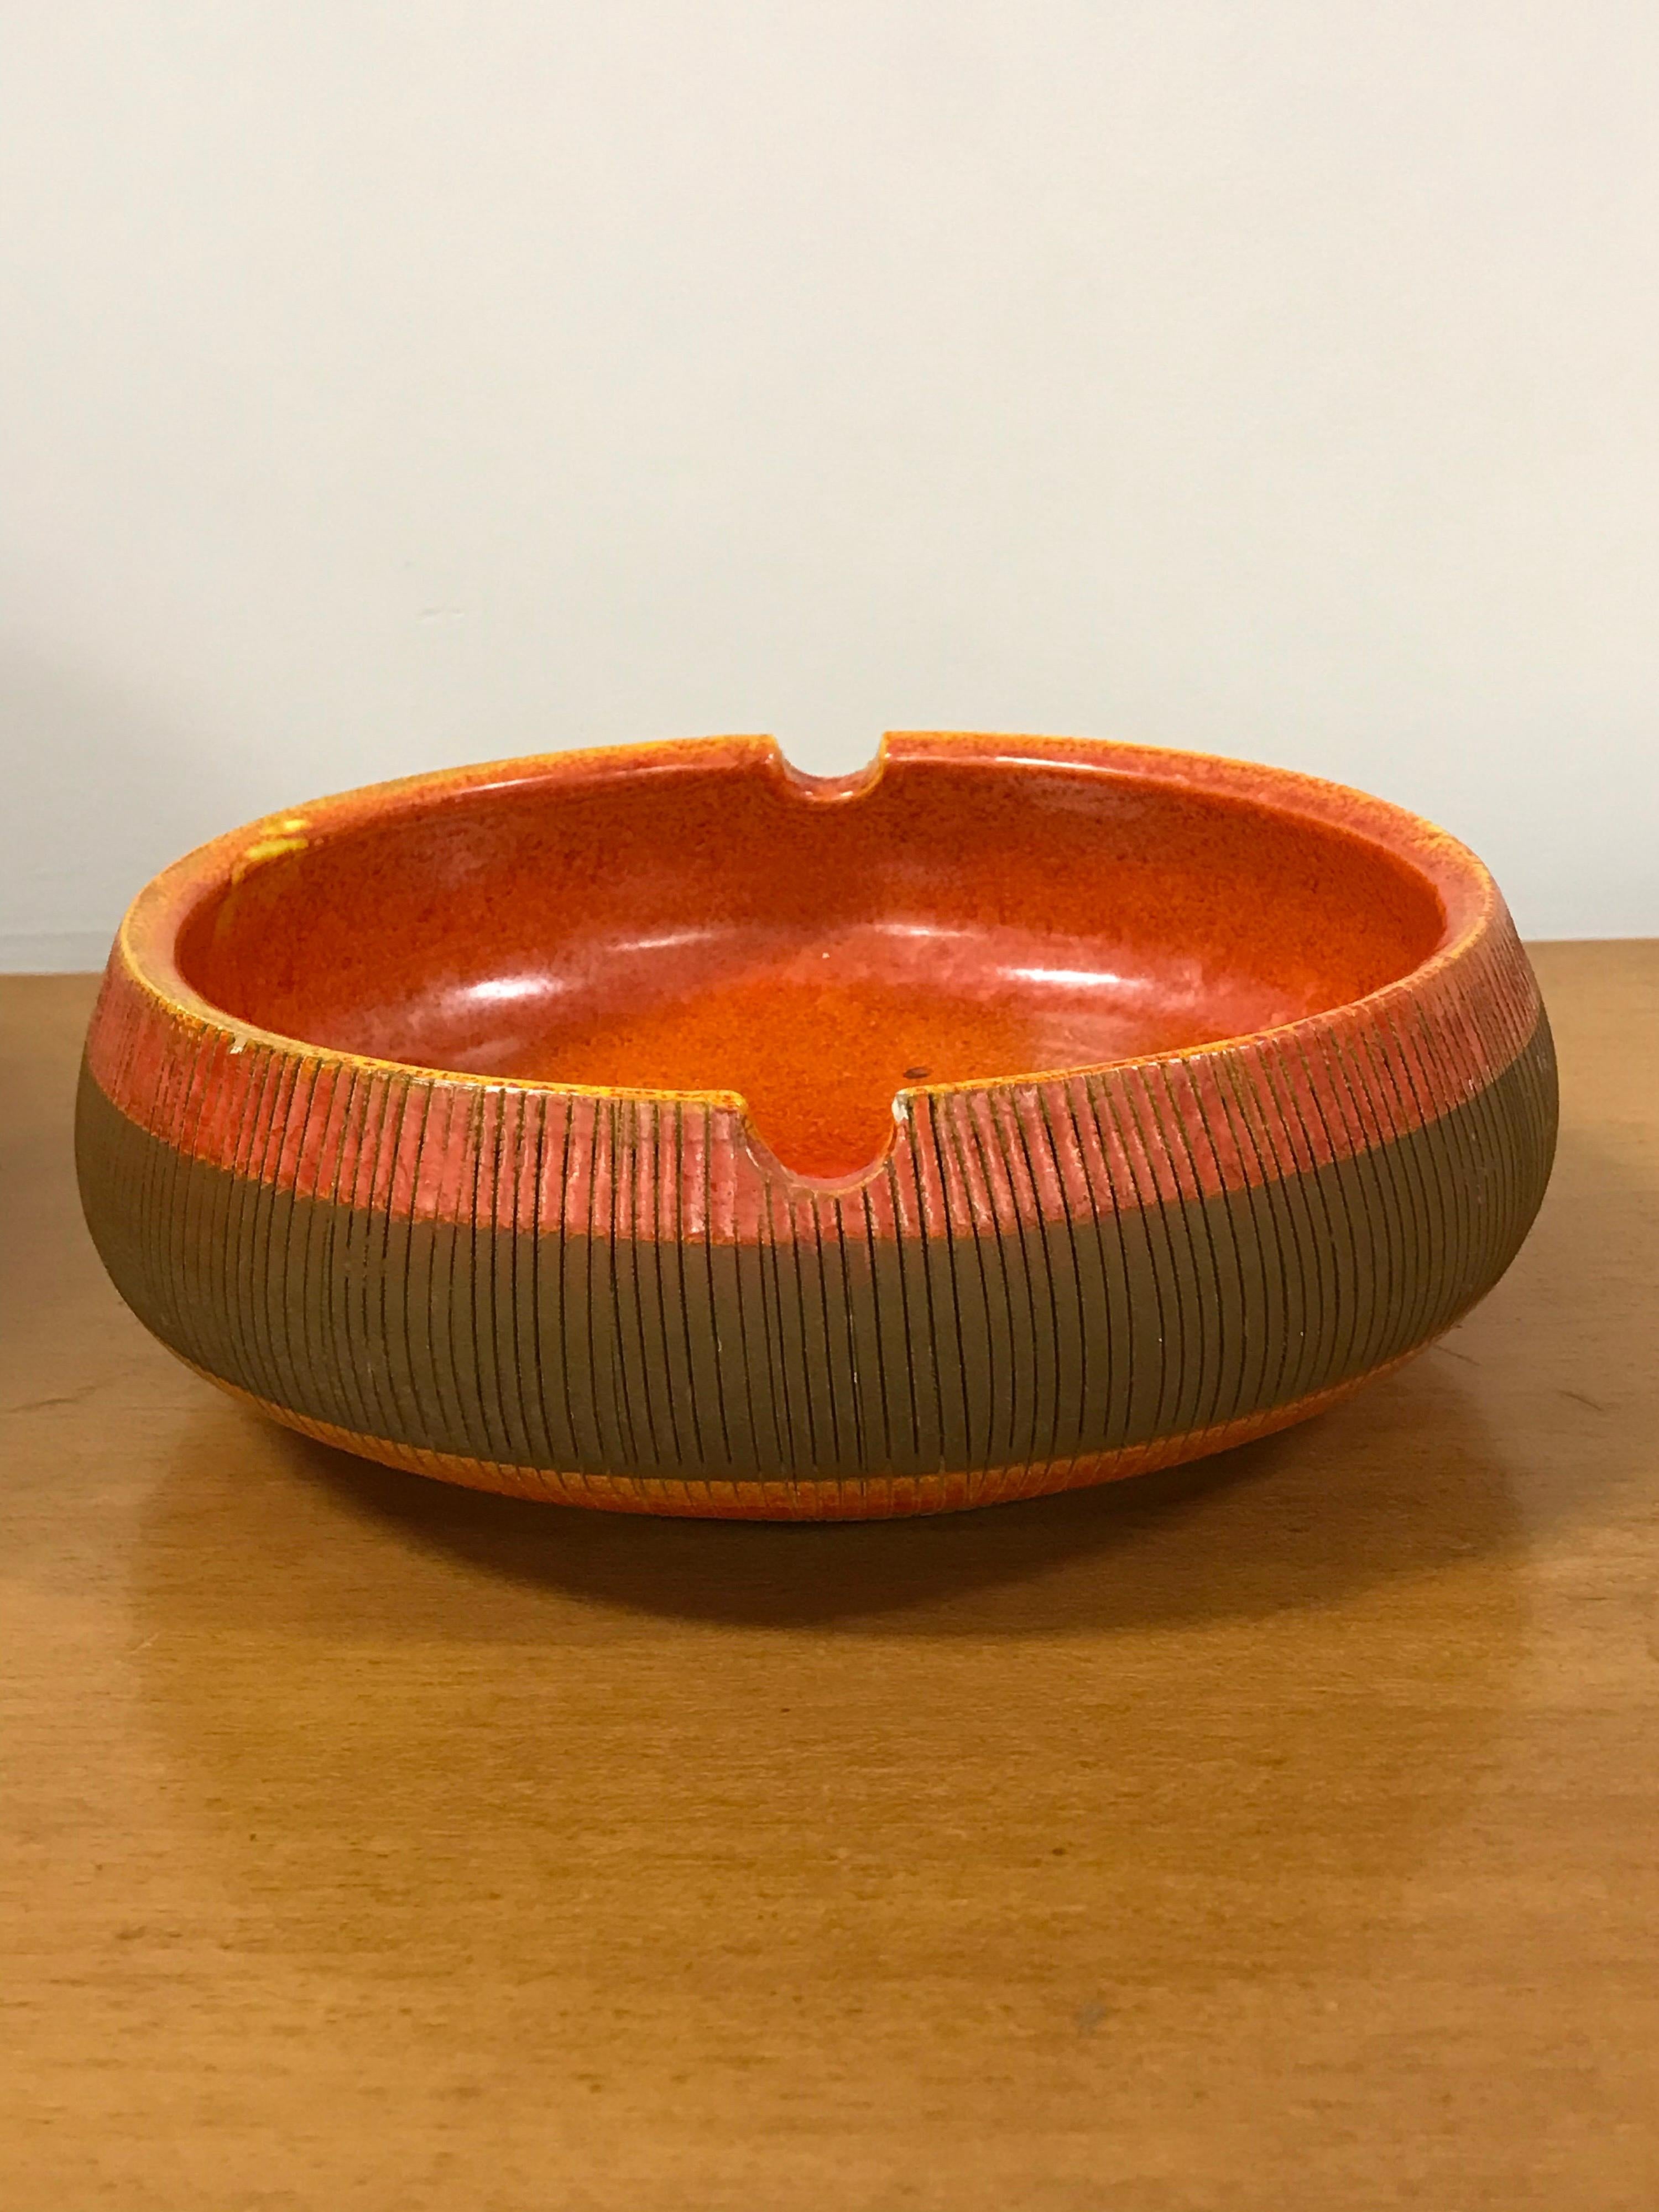 Lovely and large ashtray or catchall designed by Aldo Londi for Bitossi. Stunning colors and patterns. Well proportioned at 2.75” tall and 8.5” wide.